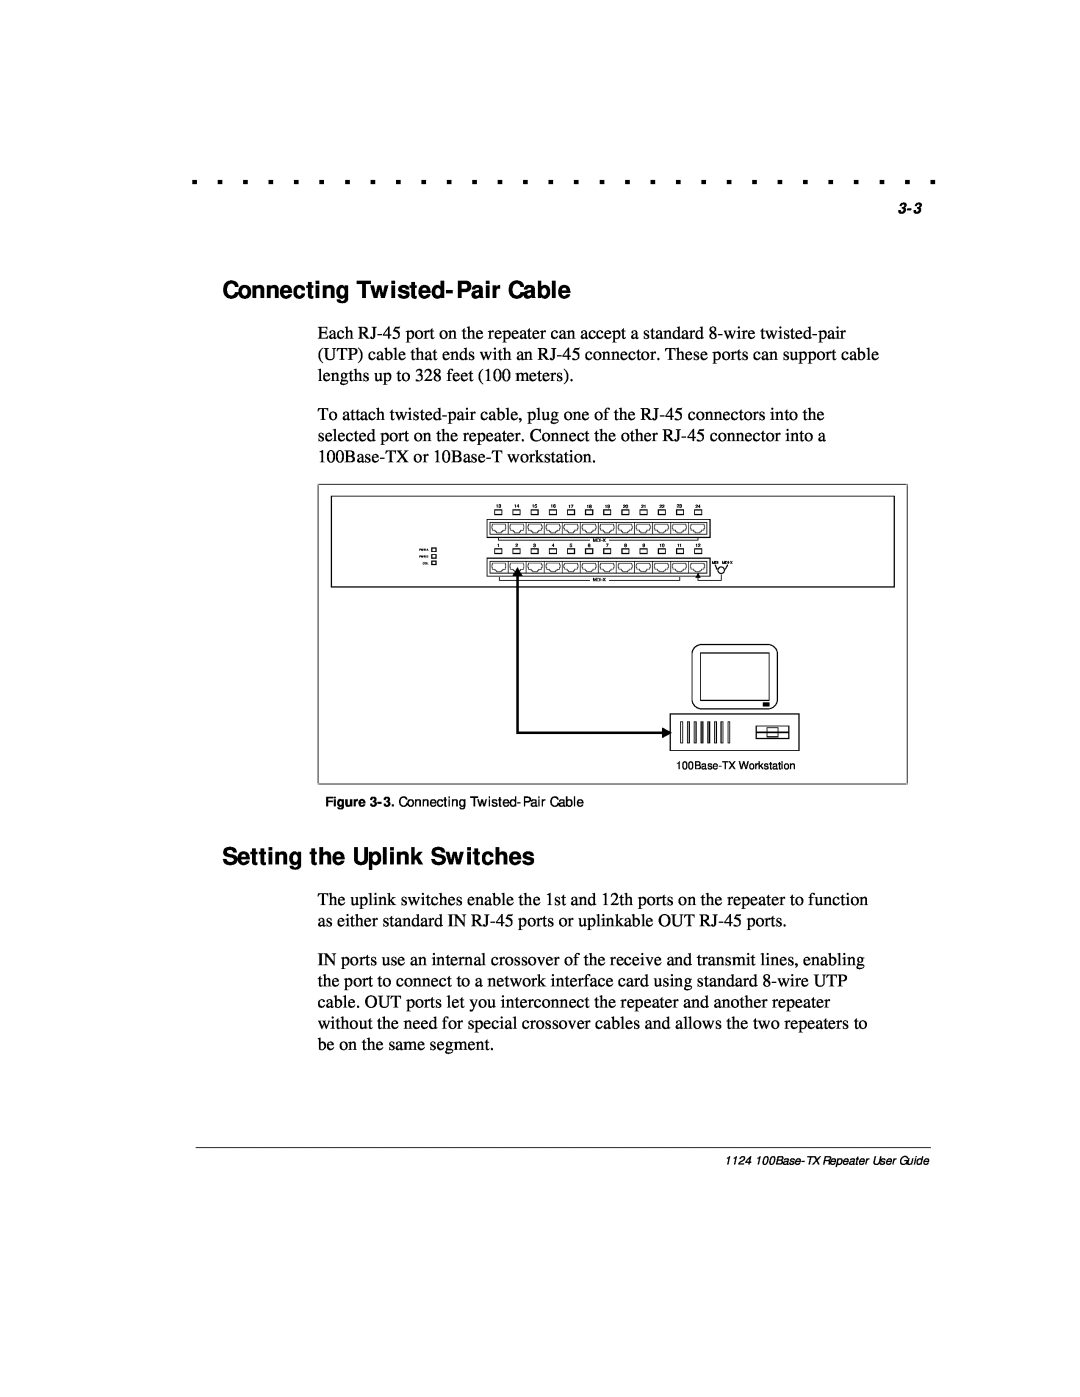 Compaq 1124 manual Setting the Uplink Switches, 3. Connecting Twisted-Pair Cable 